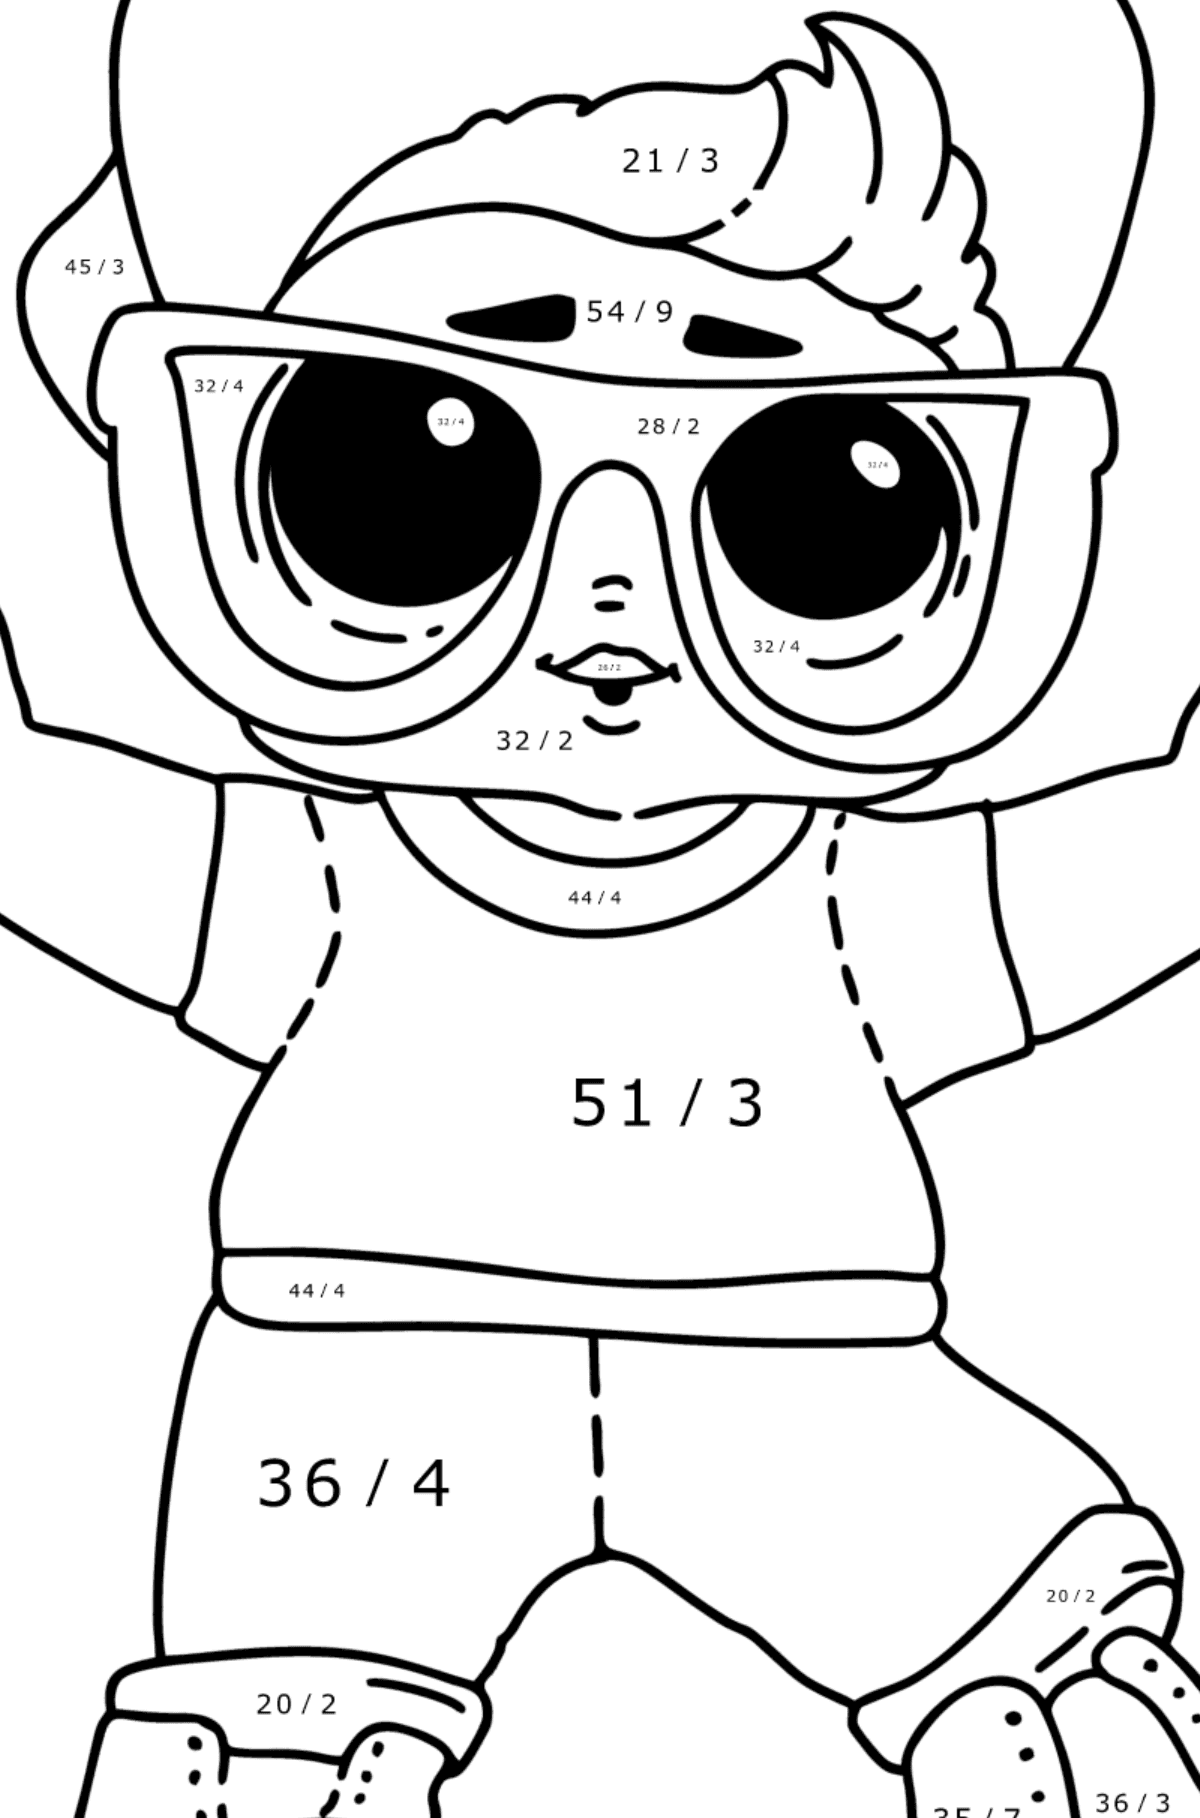 Coloring page LOL boy Next Door - Math Coloring - Division for Kids